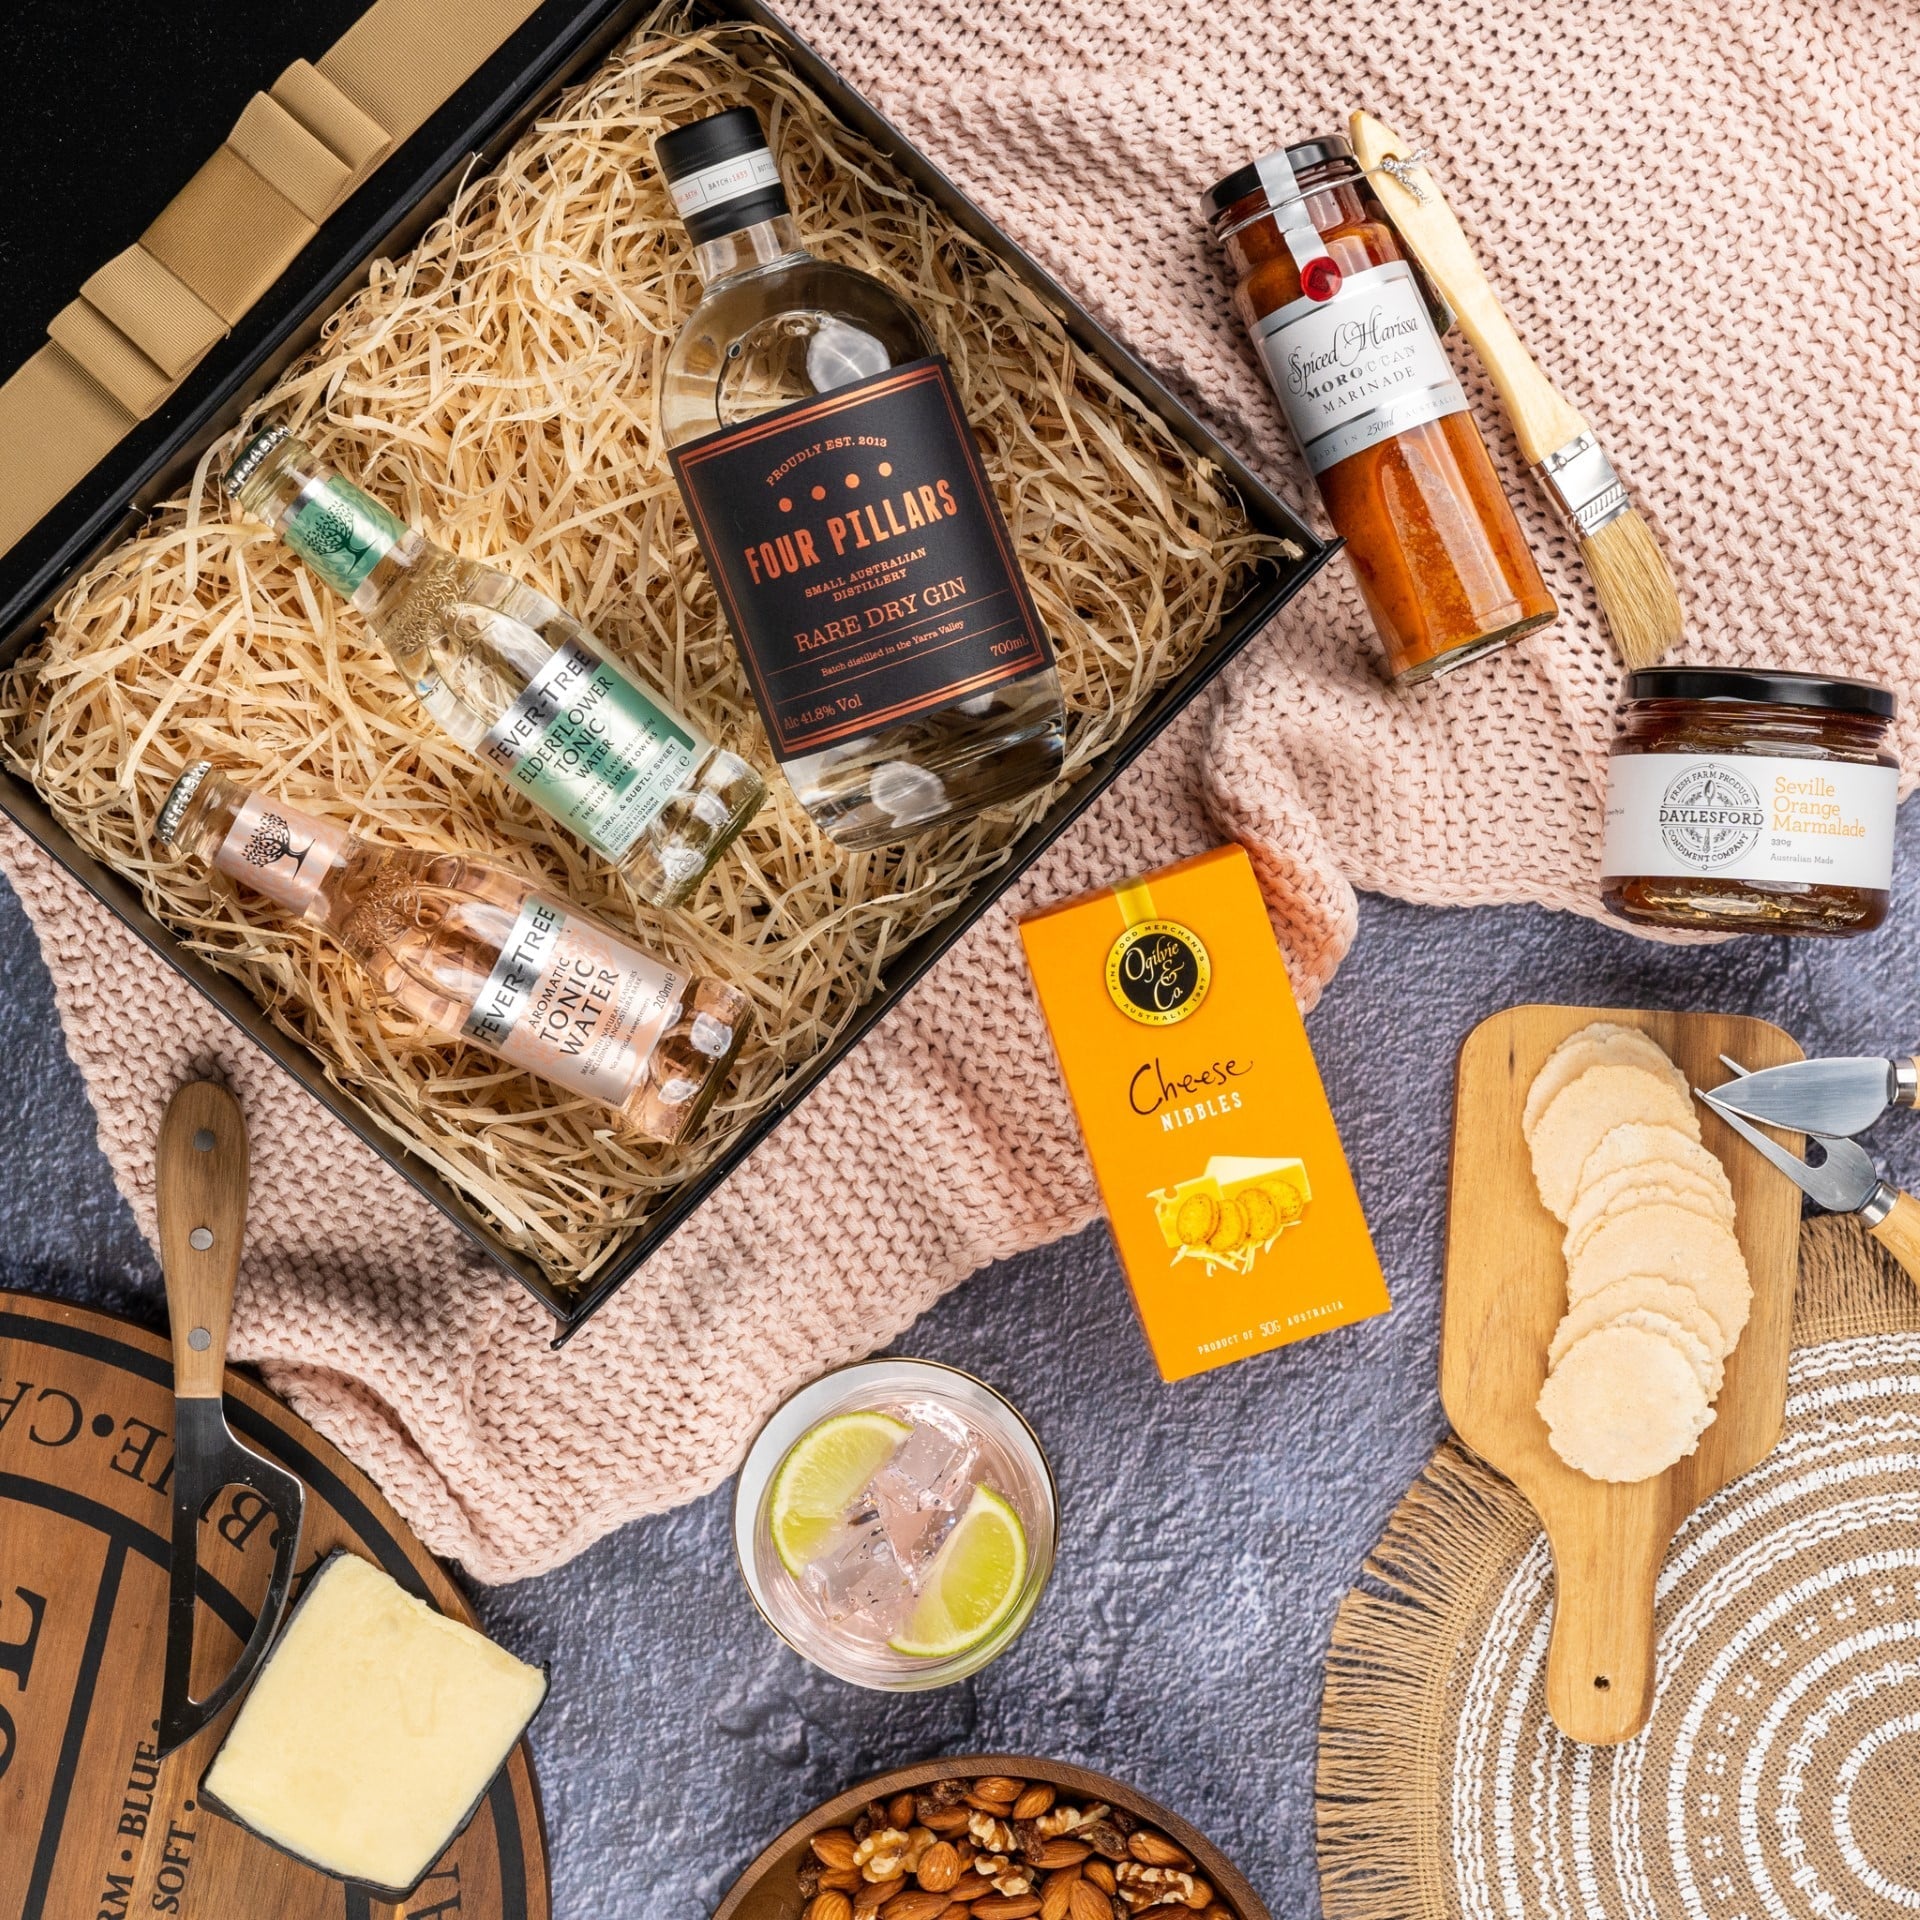 Relax with Four Pillars - The Hamper Boutique Co